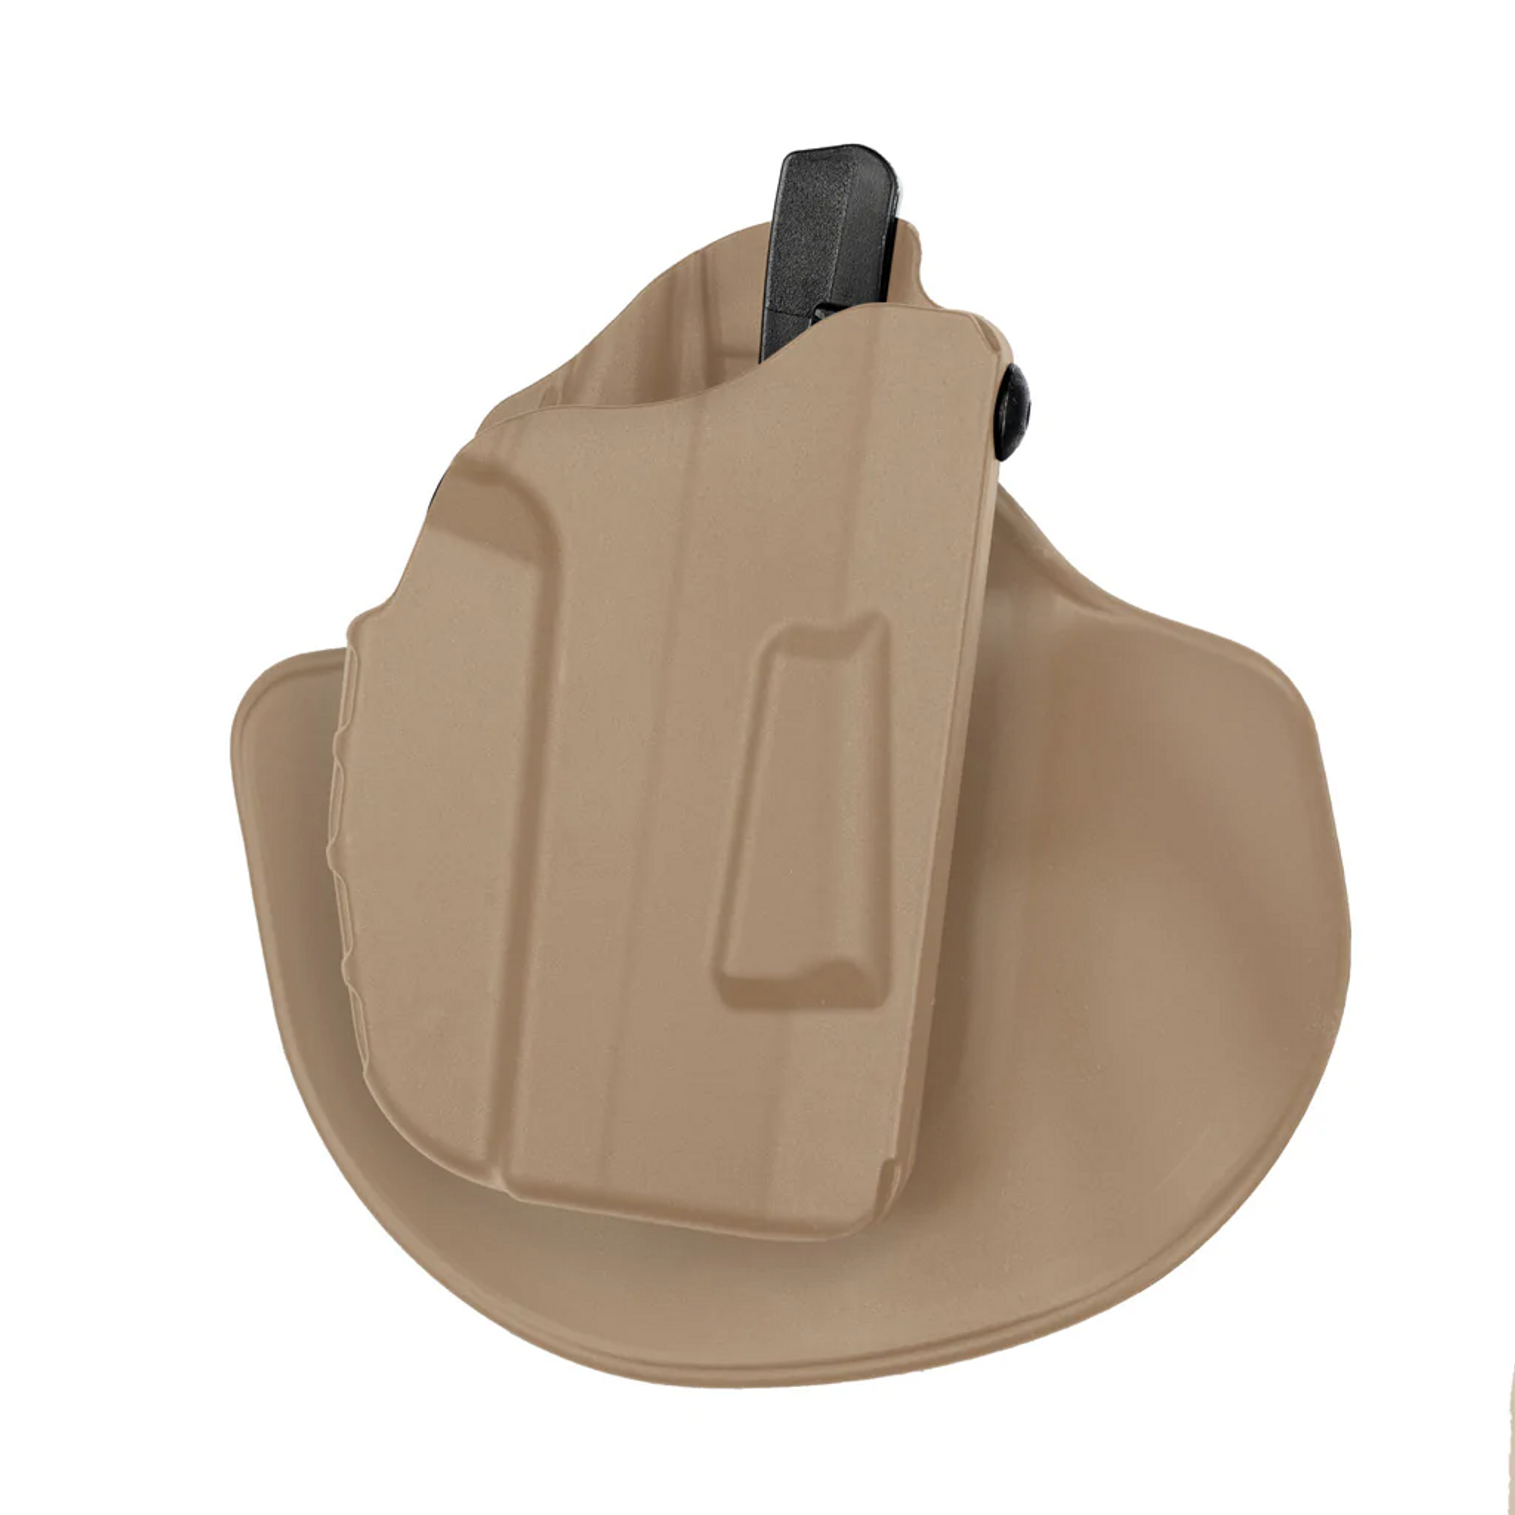 Model 7378 7ts Als Concealment Paddle And Belt Loop Combo Holster For Glock 19 W/ Light - KR7378-28325-551